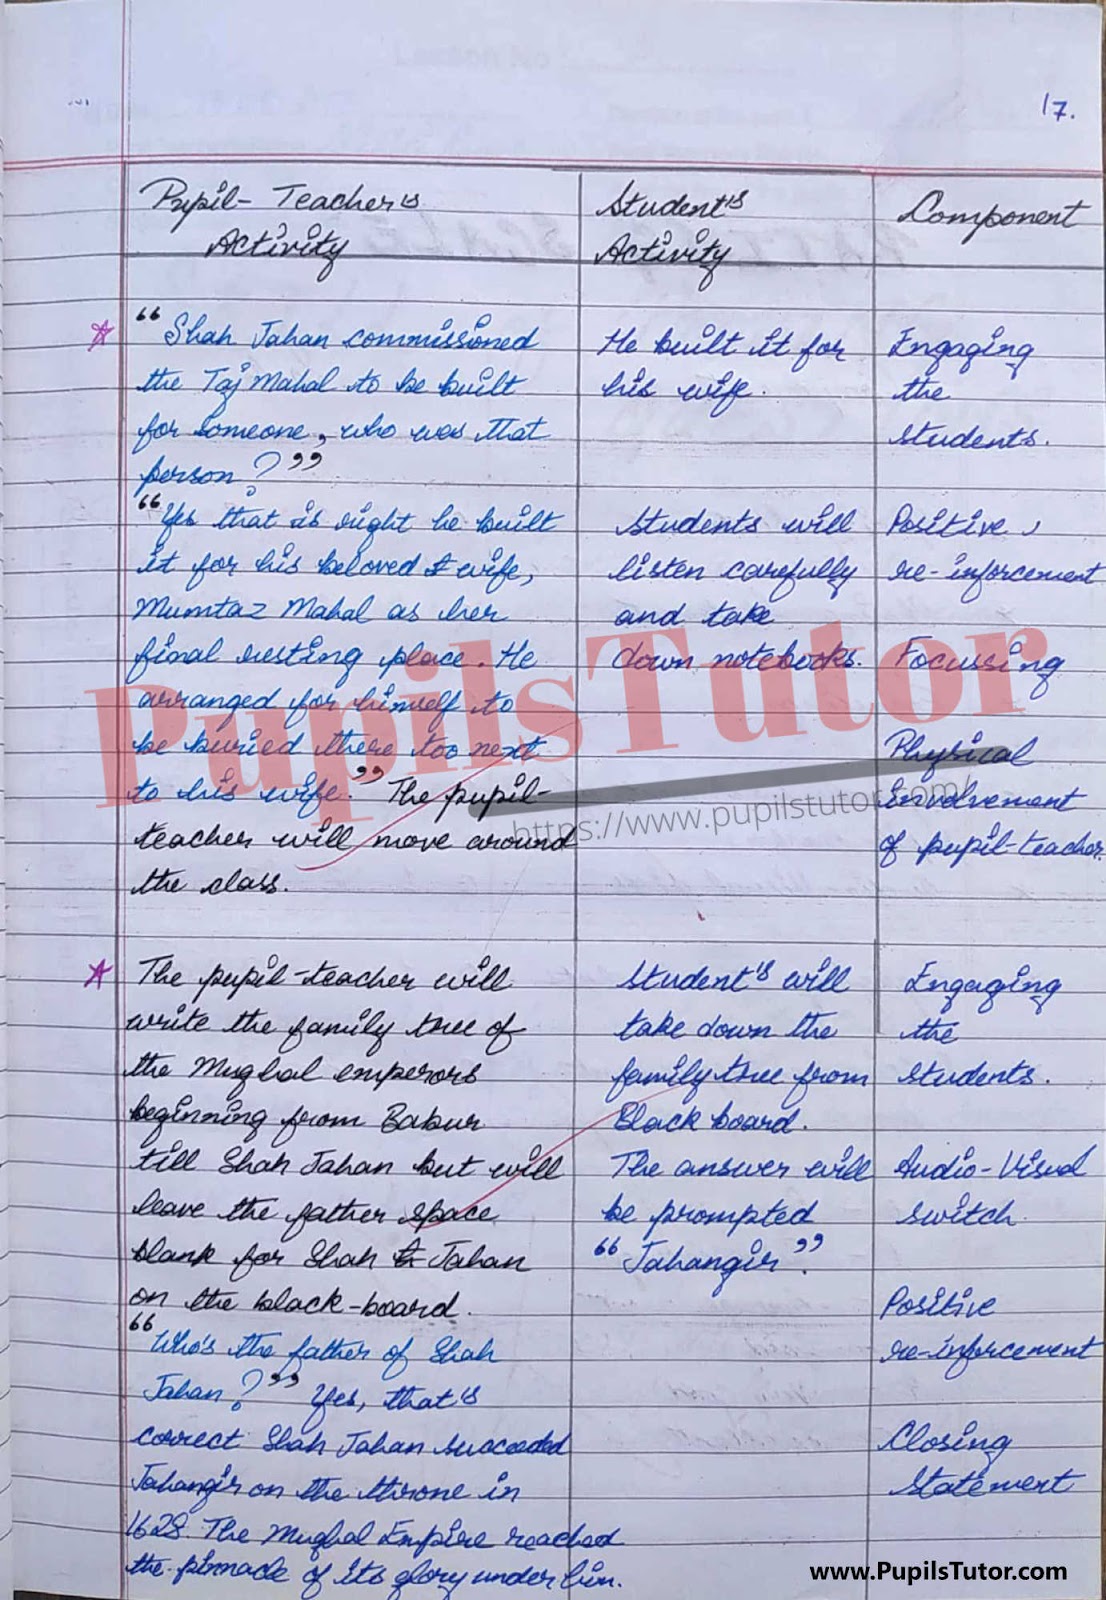 Class/Grade 7 History Lesson Plan On Shah Jahan And Taj Mahal For CBSE NCERT KVS School And University College Teachers – (Page And Image Number 3) – www.pupilstutor.com